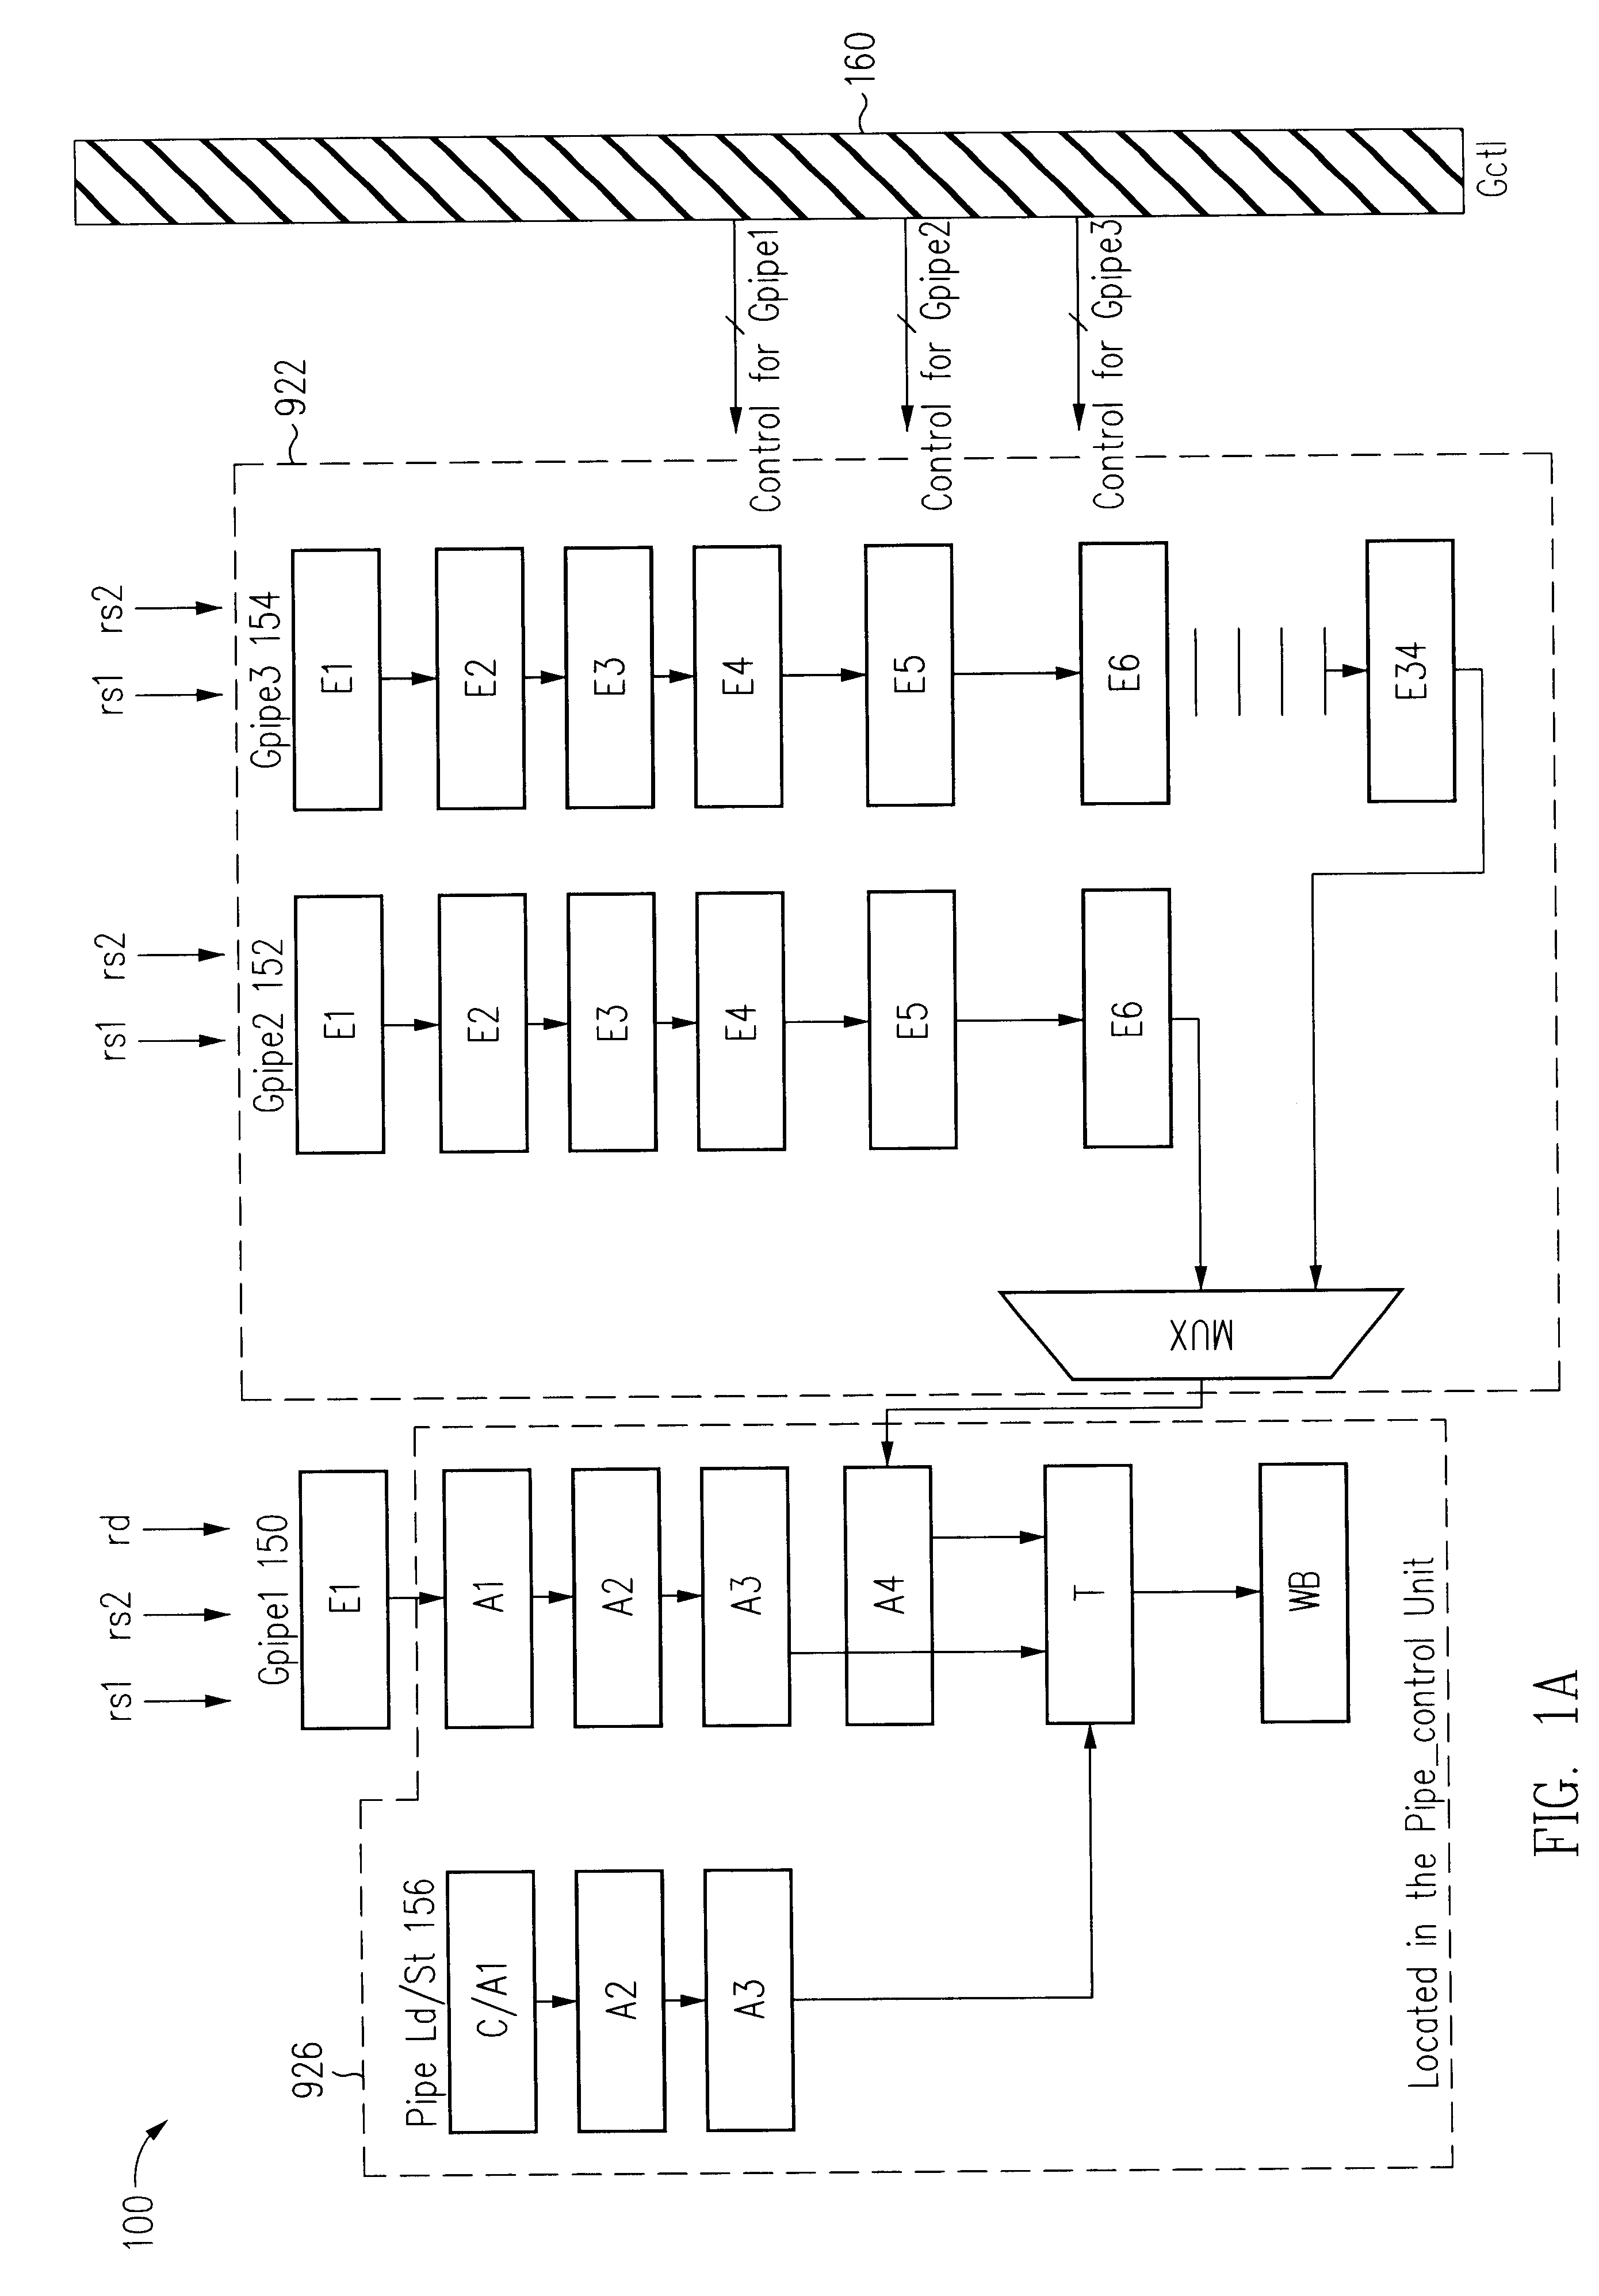 Parallel fixed point square root and reciprocal square root computation unit in a processor